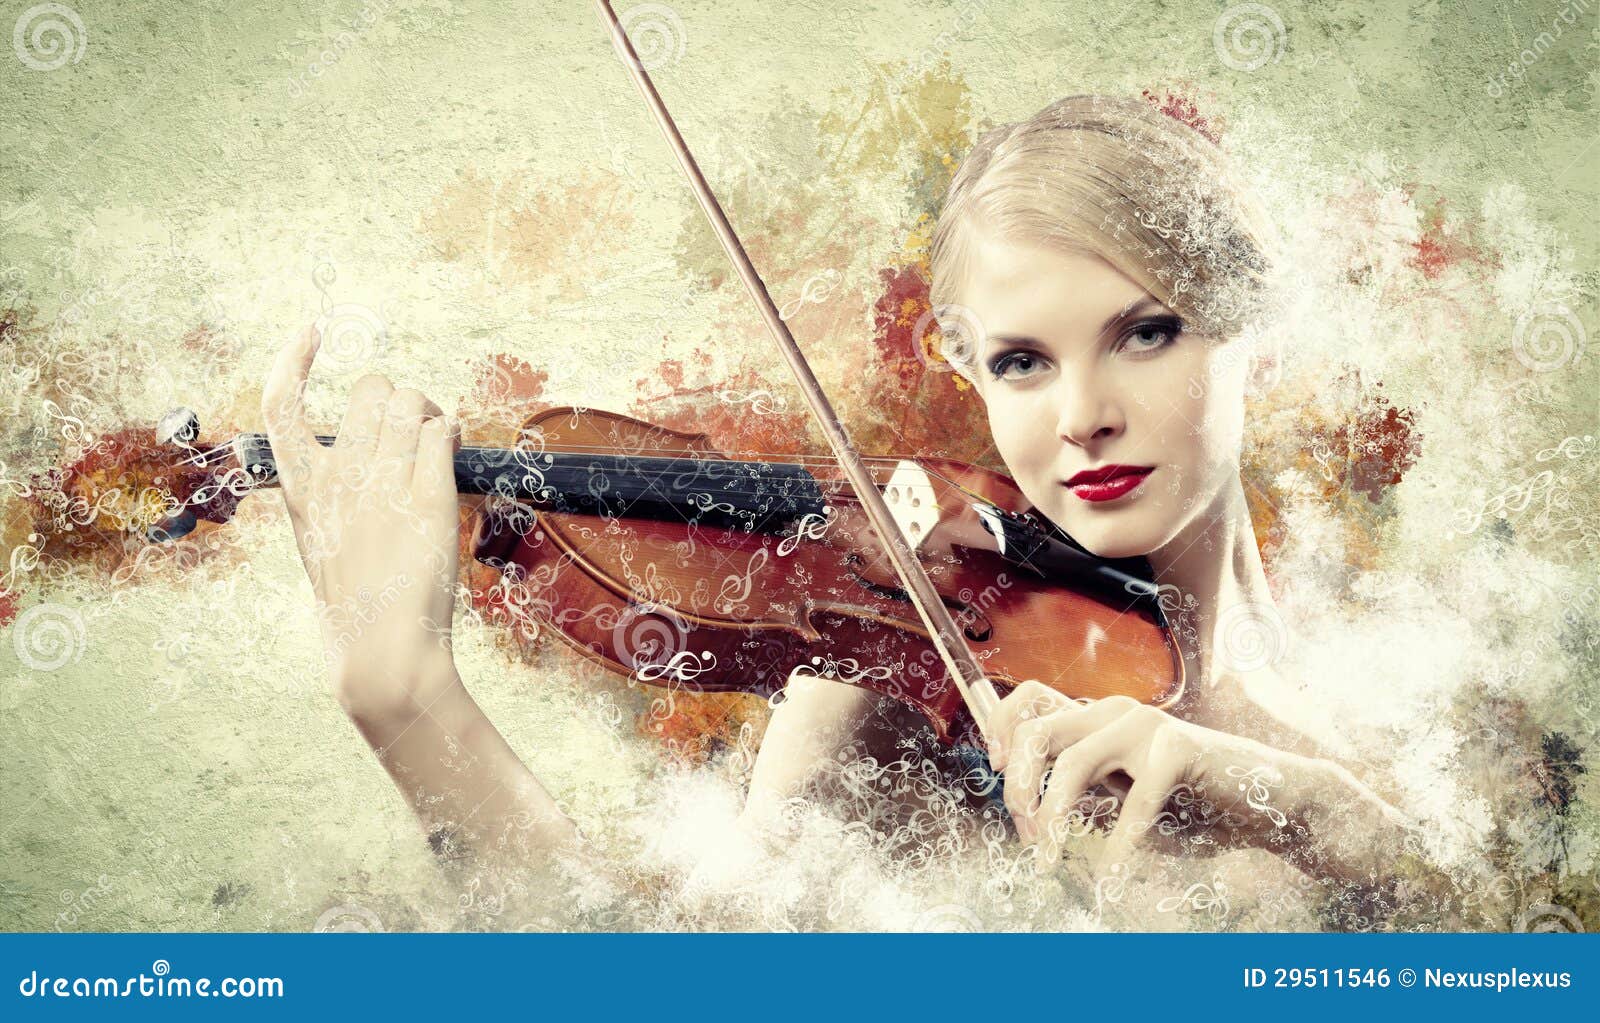 Gorgeous Woman Playing on Violin Stock Photo - Image of lesson ...